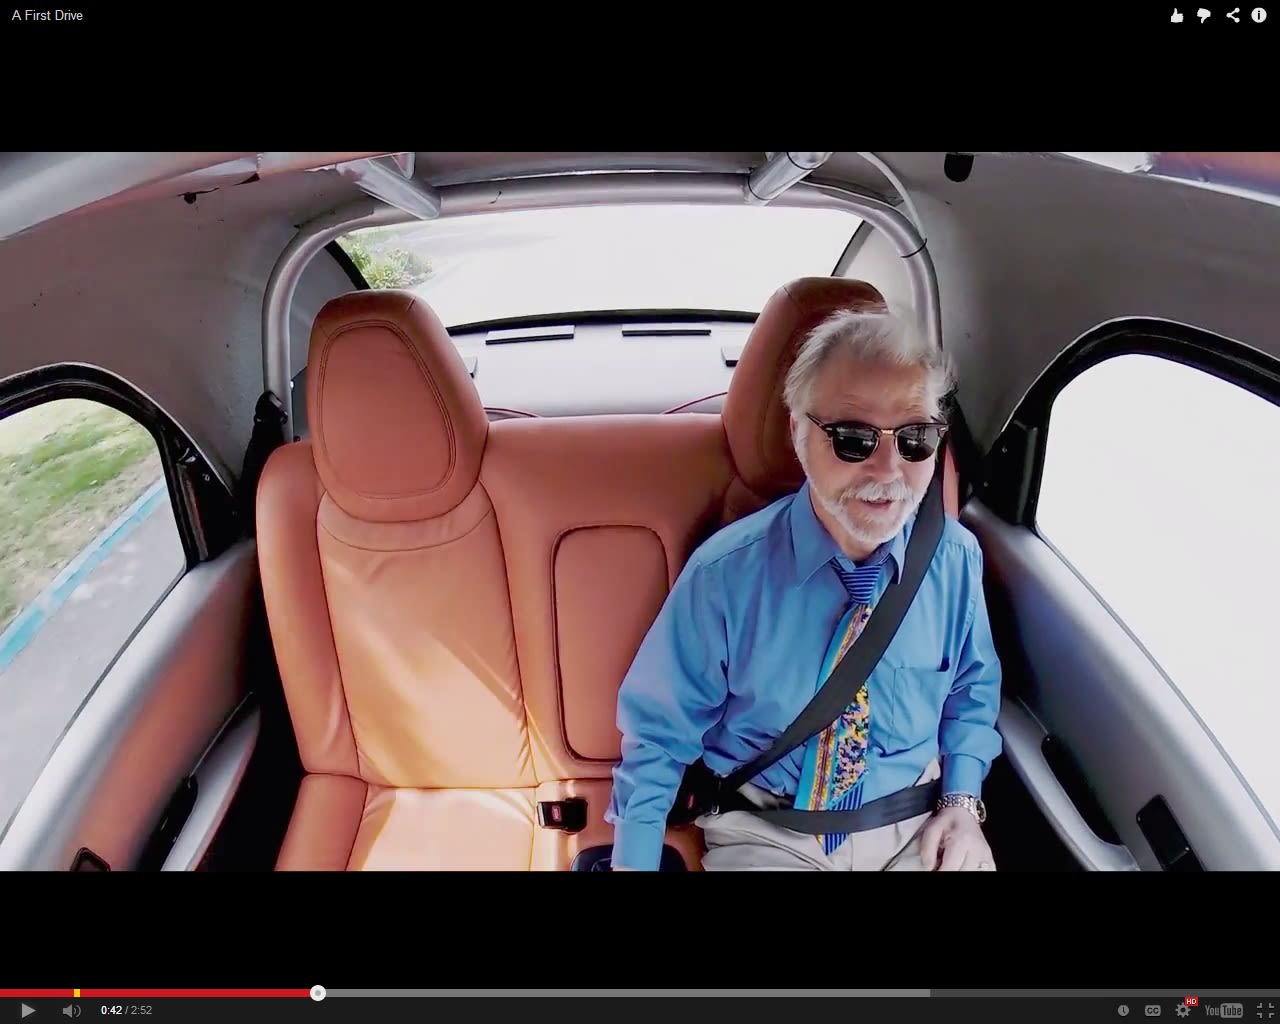 Google's new self-driving car prototype seats only two people, and its interior is simple.